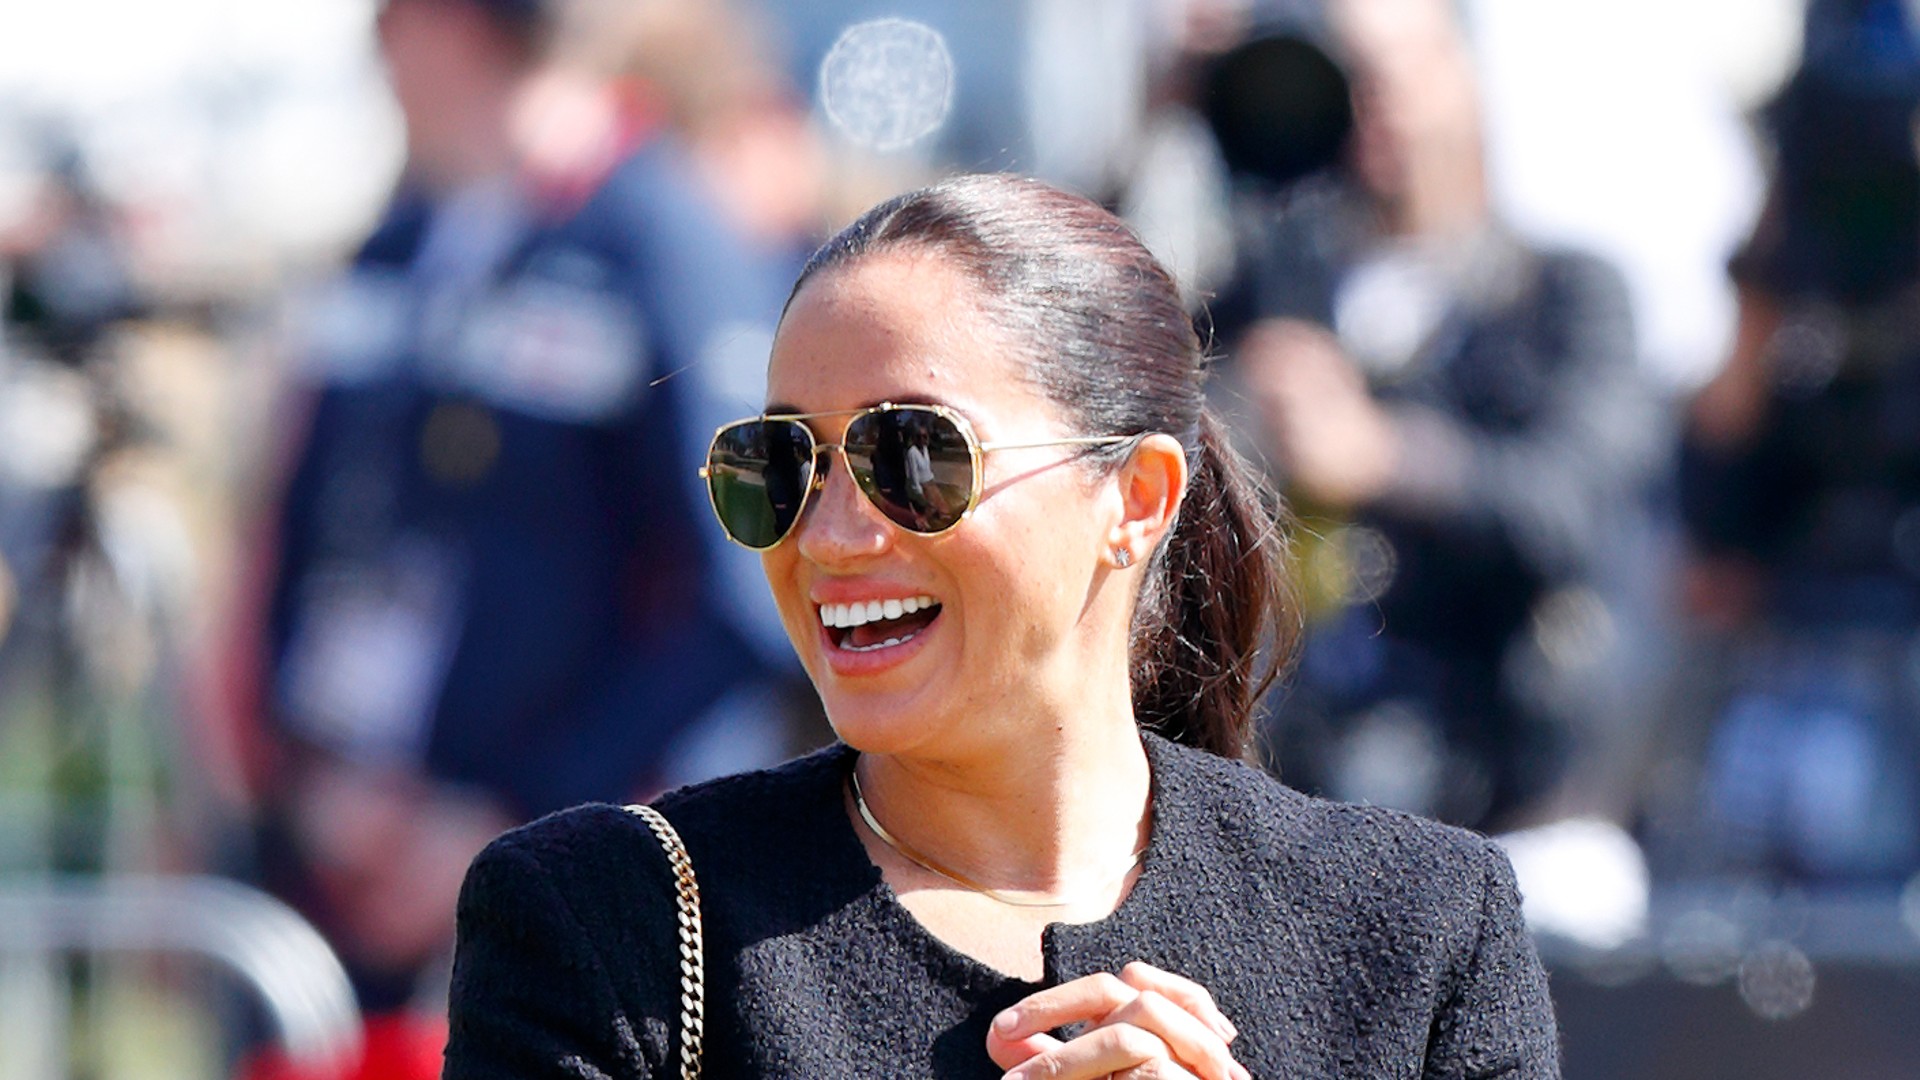 Meghan Markle's pinky ring has style and meaning -here's how | Woman & Home